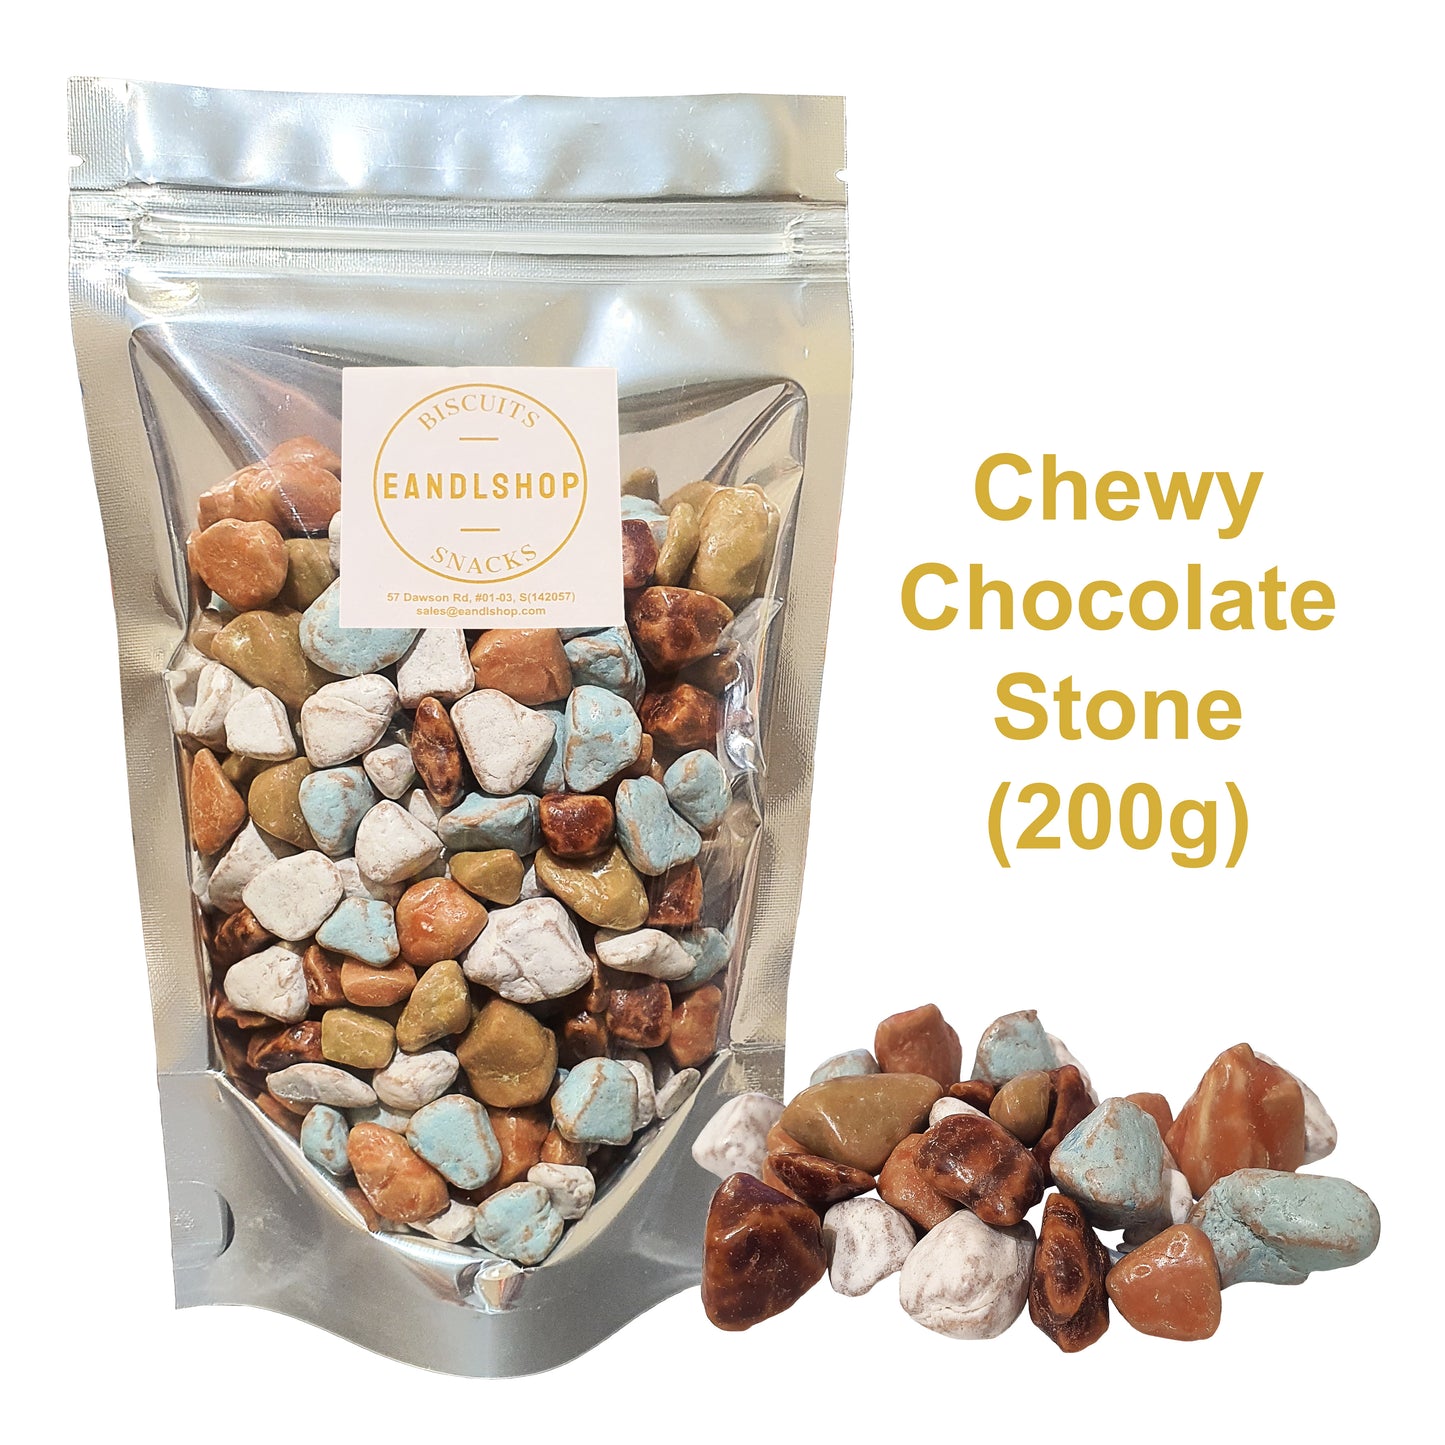 Chewy Chocolate Stone. Old-school biscuits, modern snacks (chips, crackers), cakes, gummies, plums, dried fruits, nuts, herbal tea – available at www.EANDLSHOP.com